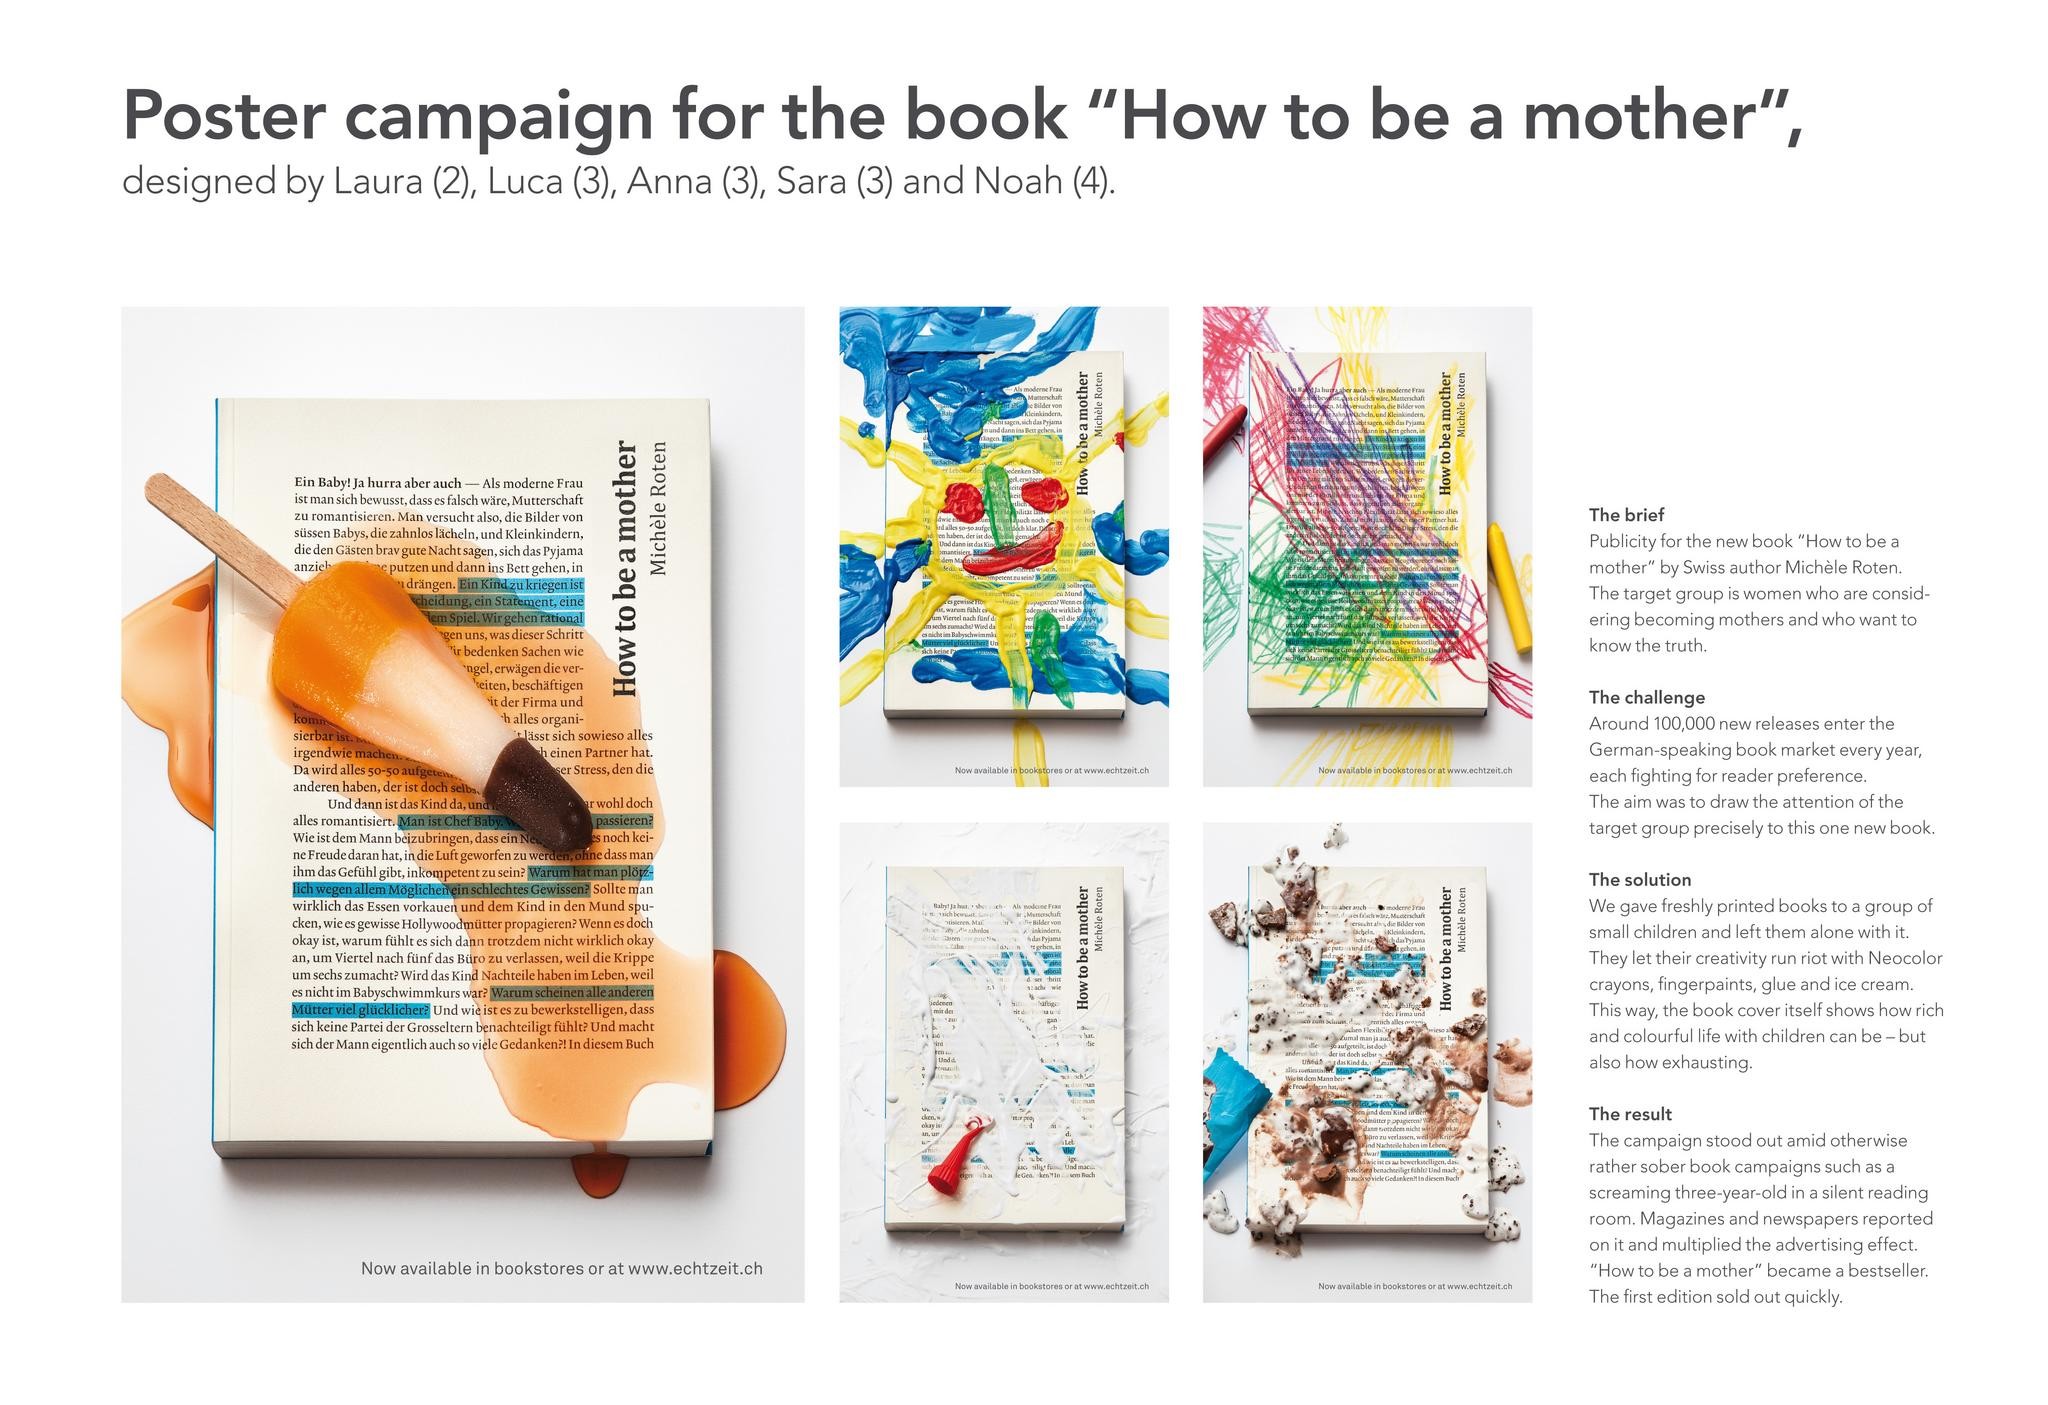 ECHTZEIT BOOK CAMPAIGN “HOW TO BE A MOTHER“